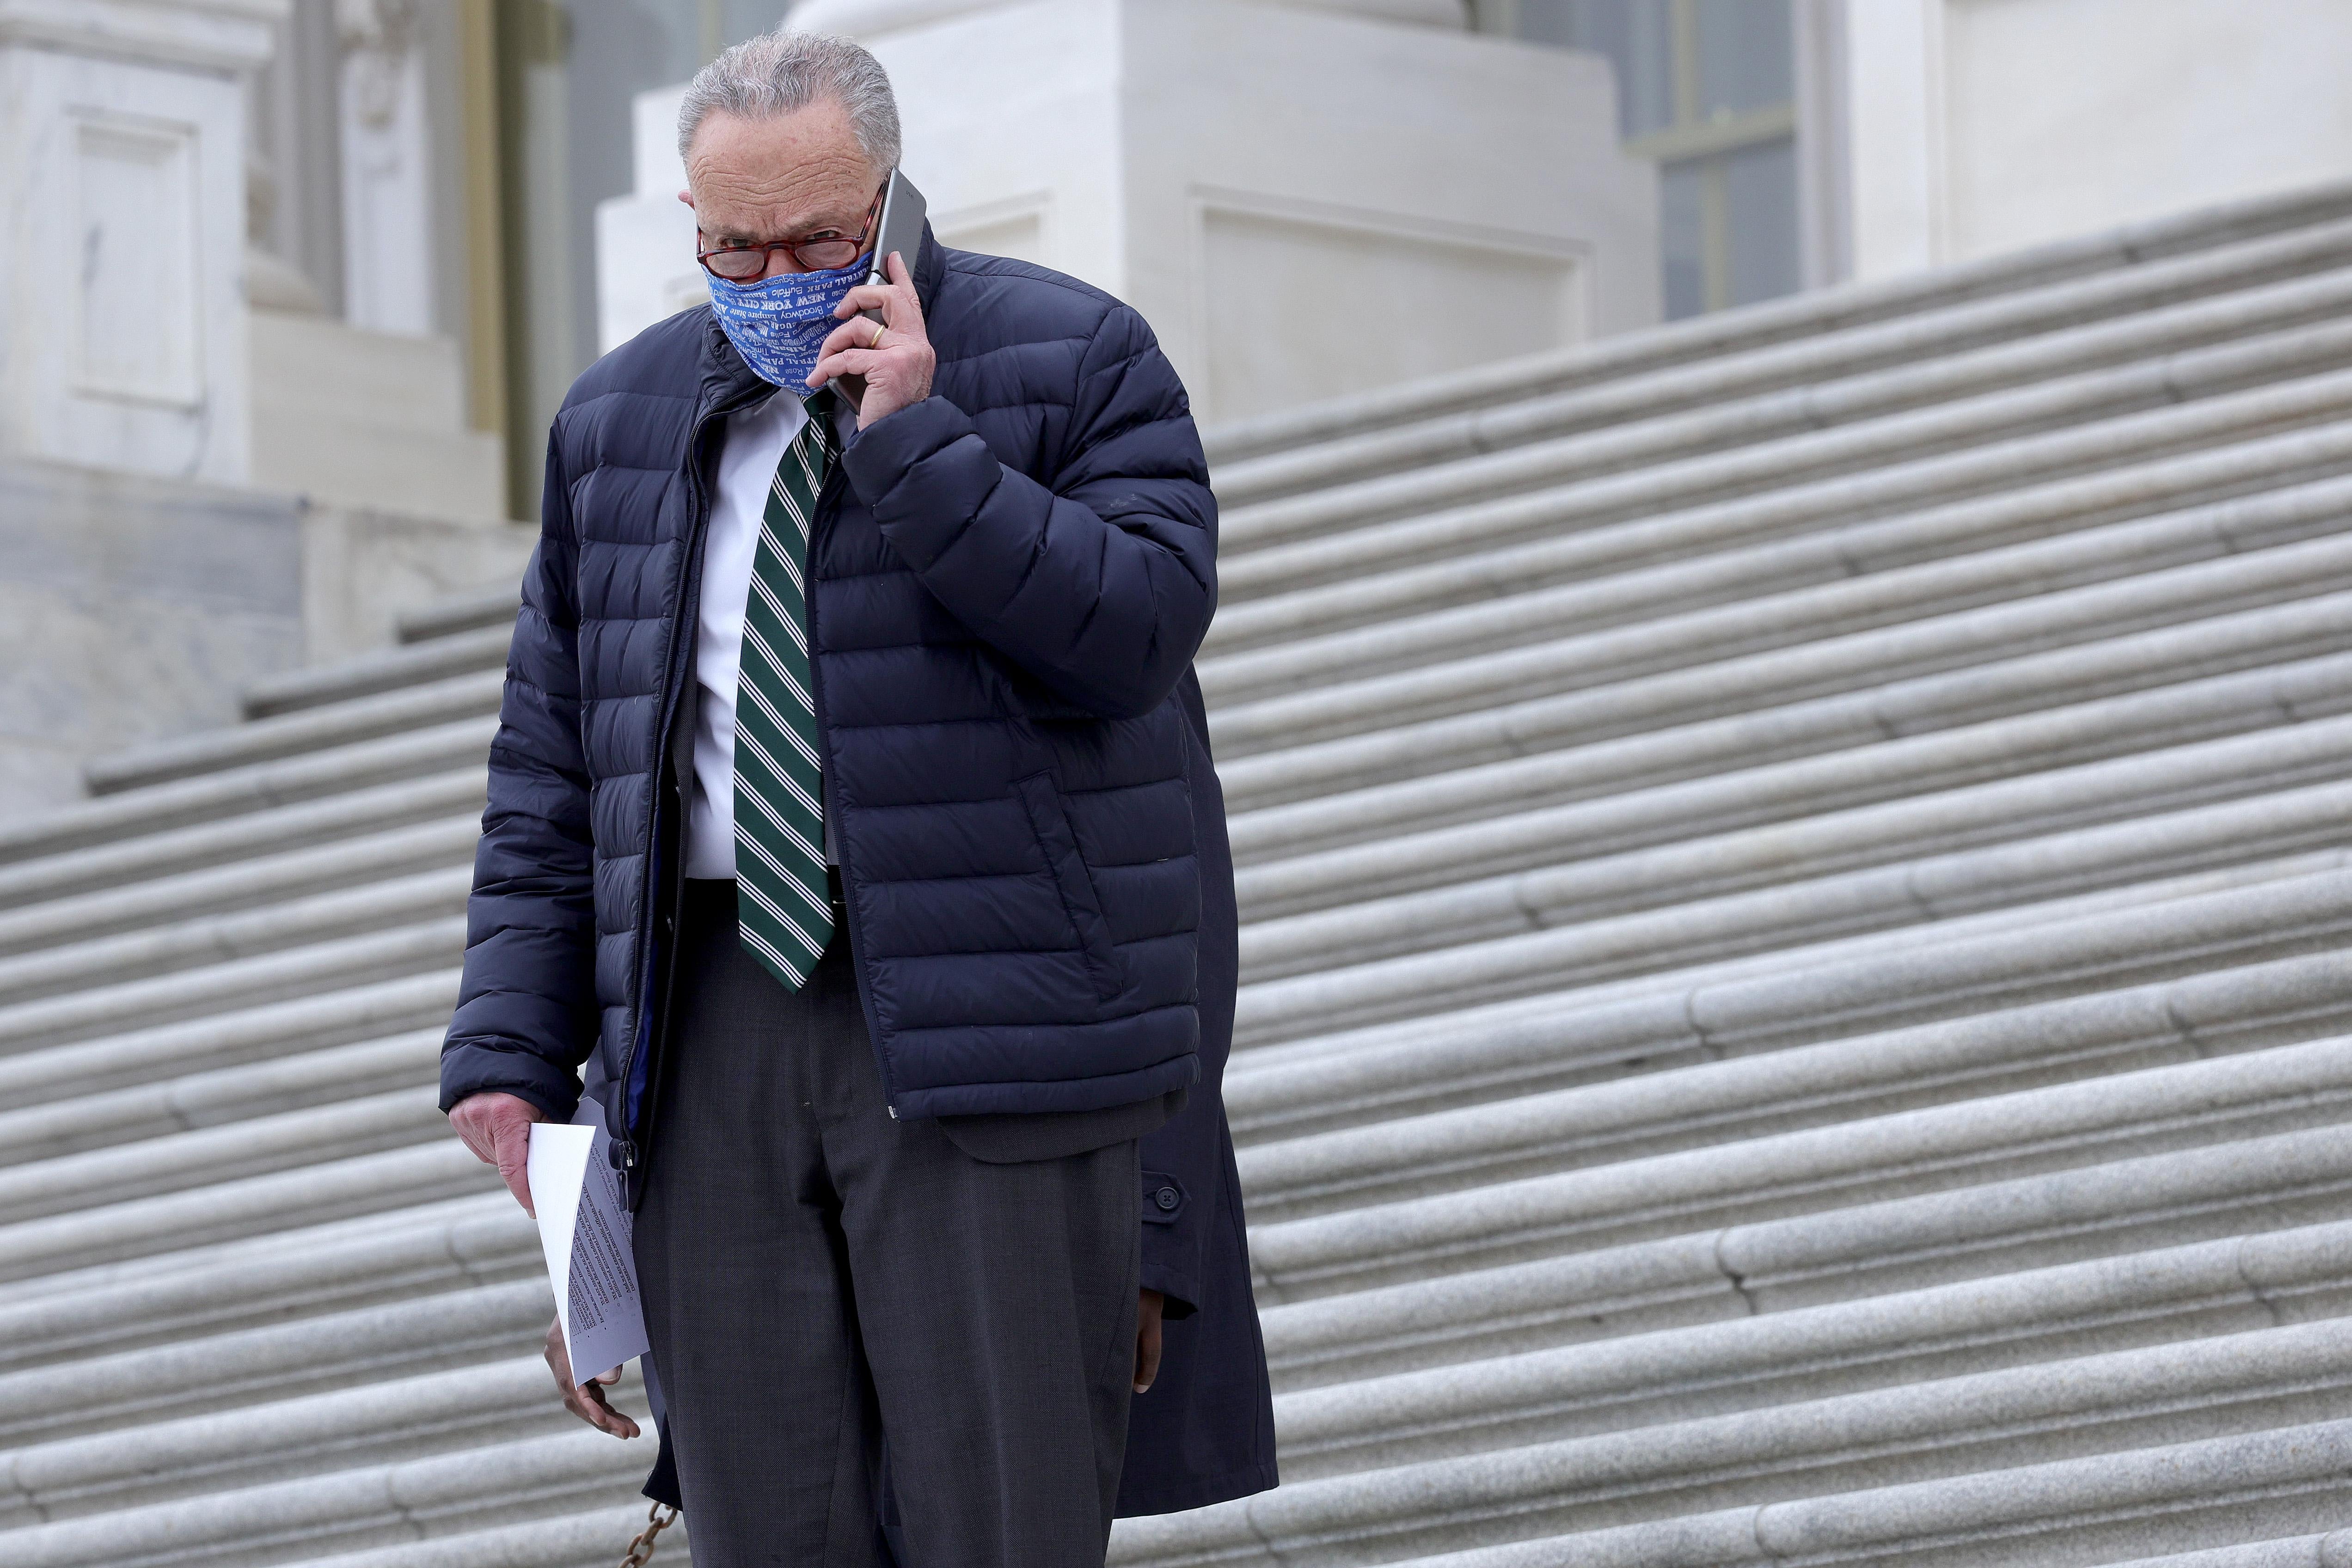 Chuck Schumer talks on his phone while walking down stairs outside the U.S. Capitol